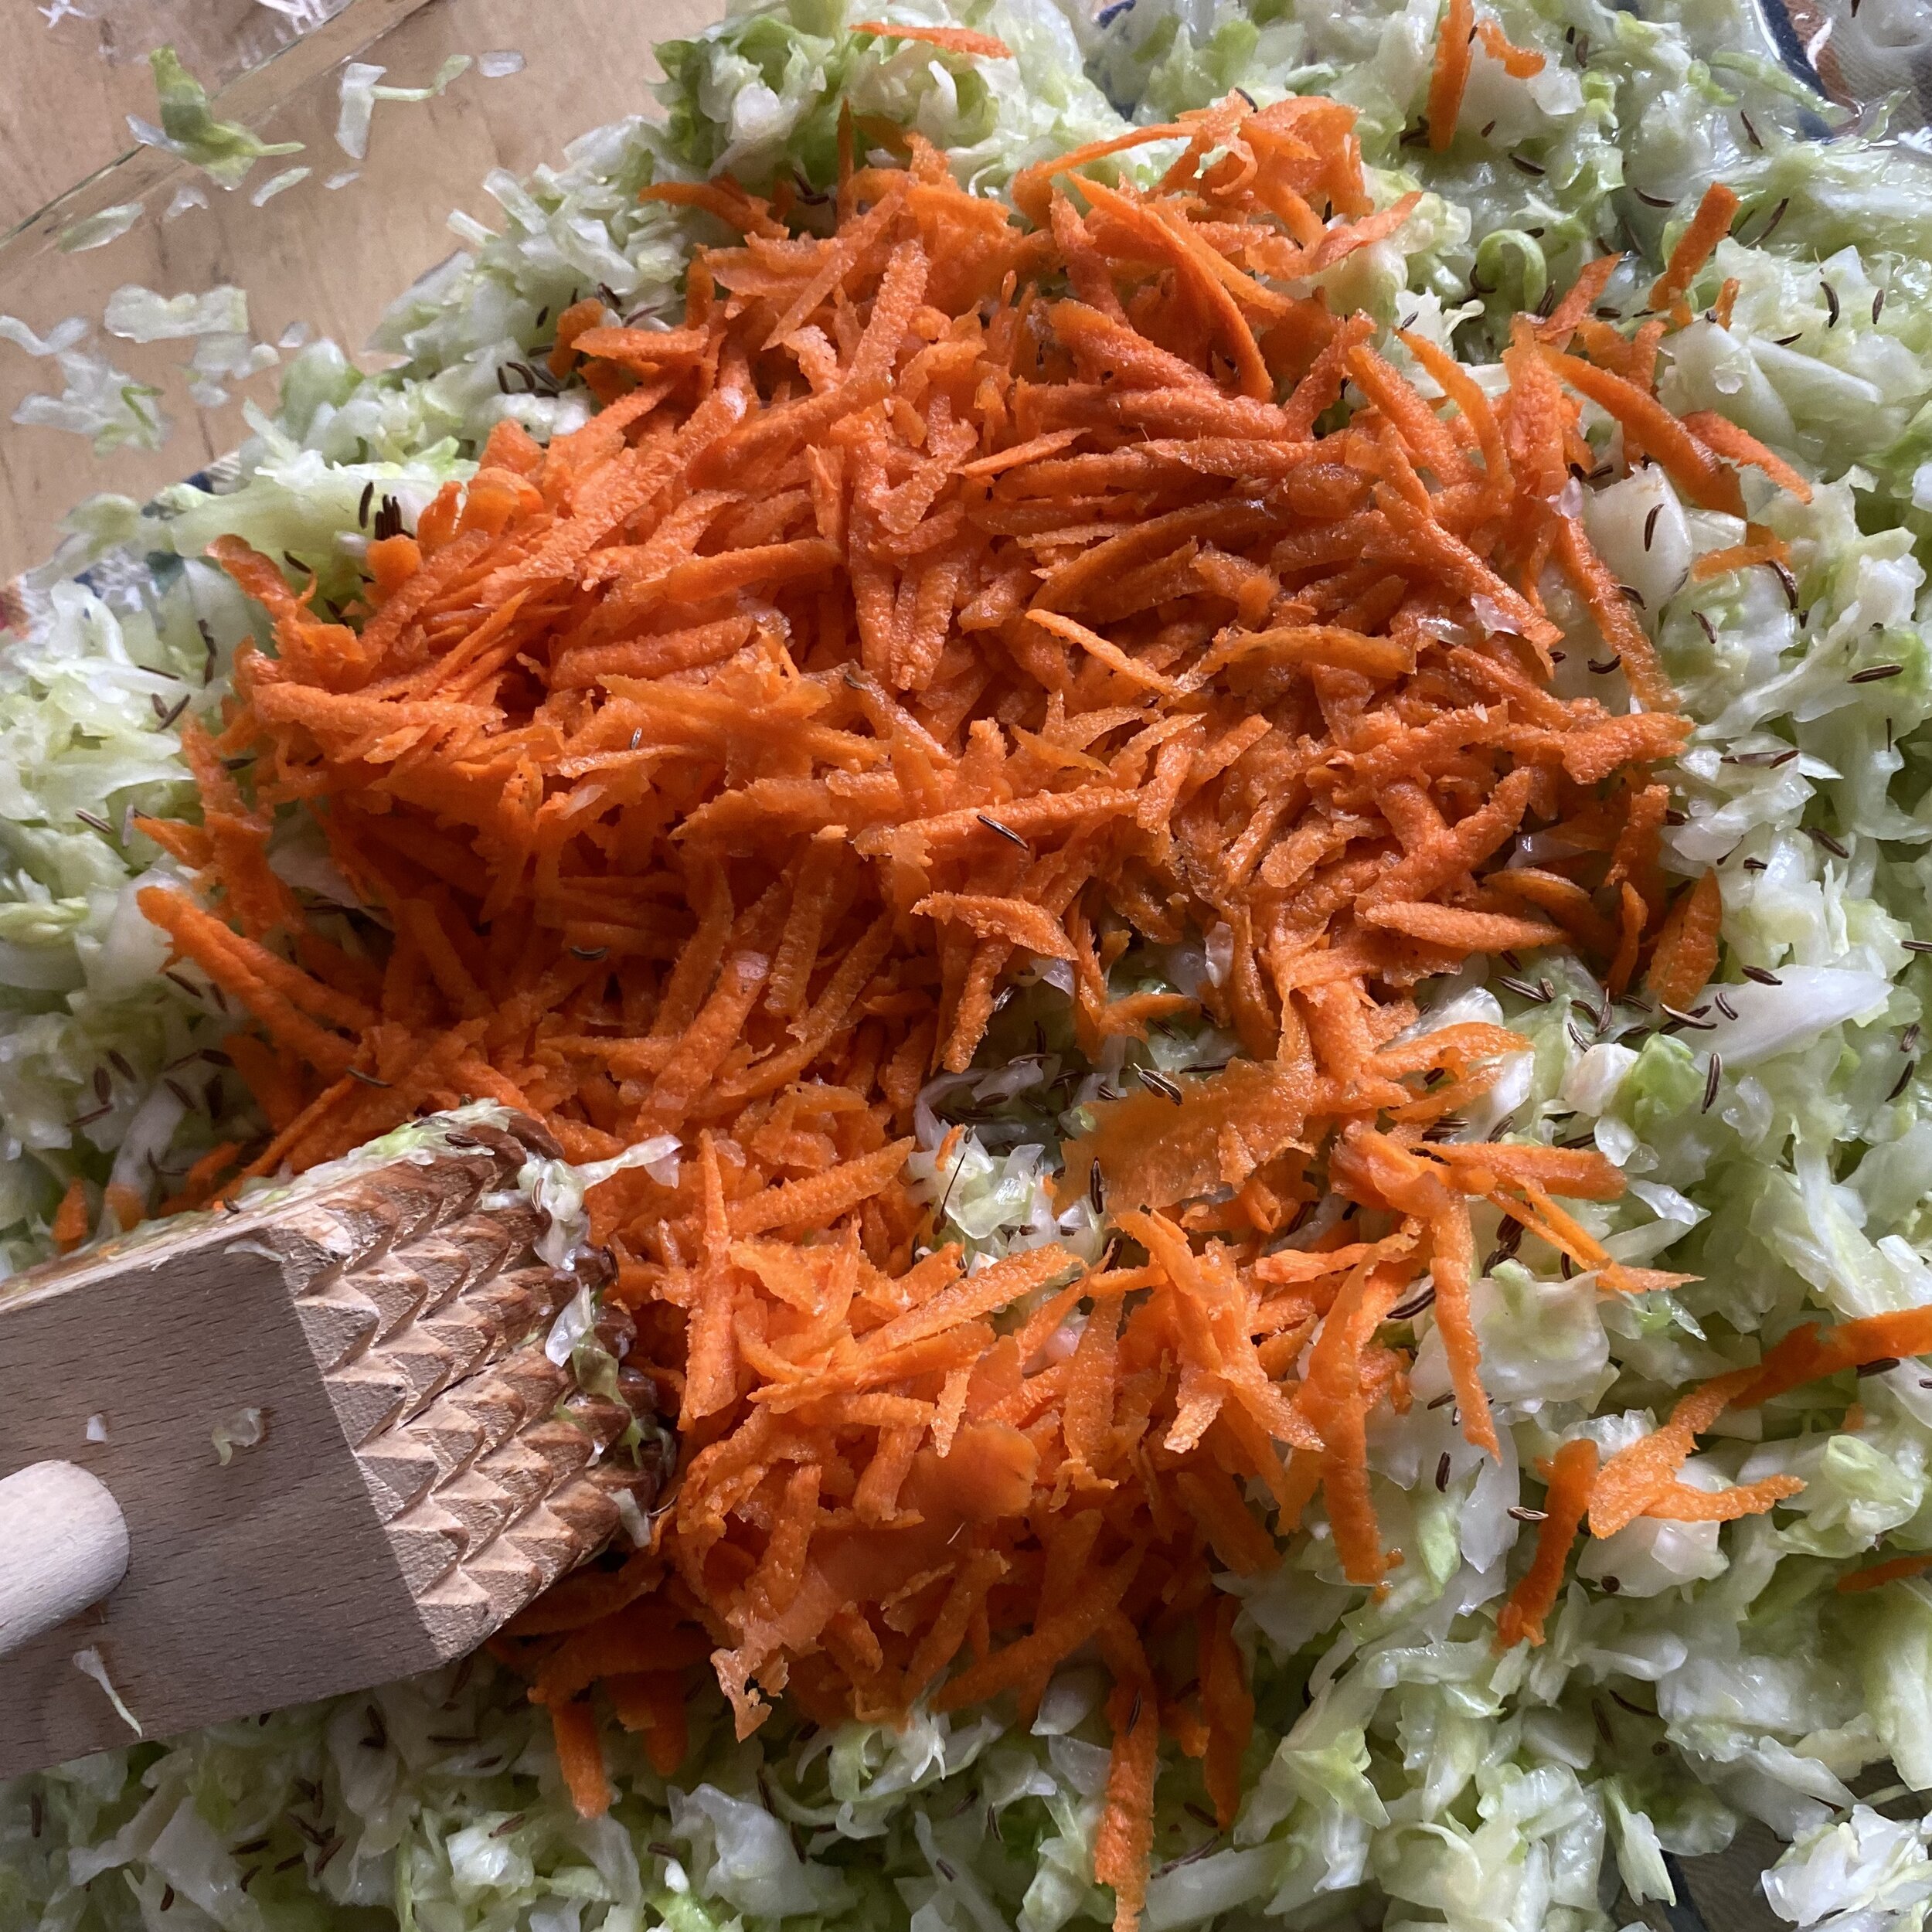 This recipe we added carrots, they do not need to be pounded as much as the cabbage does